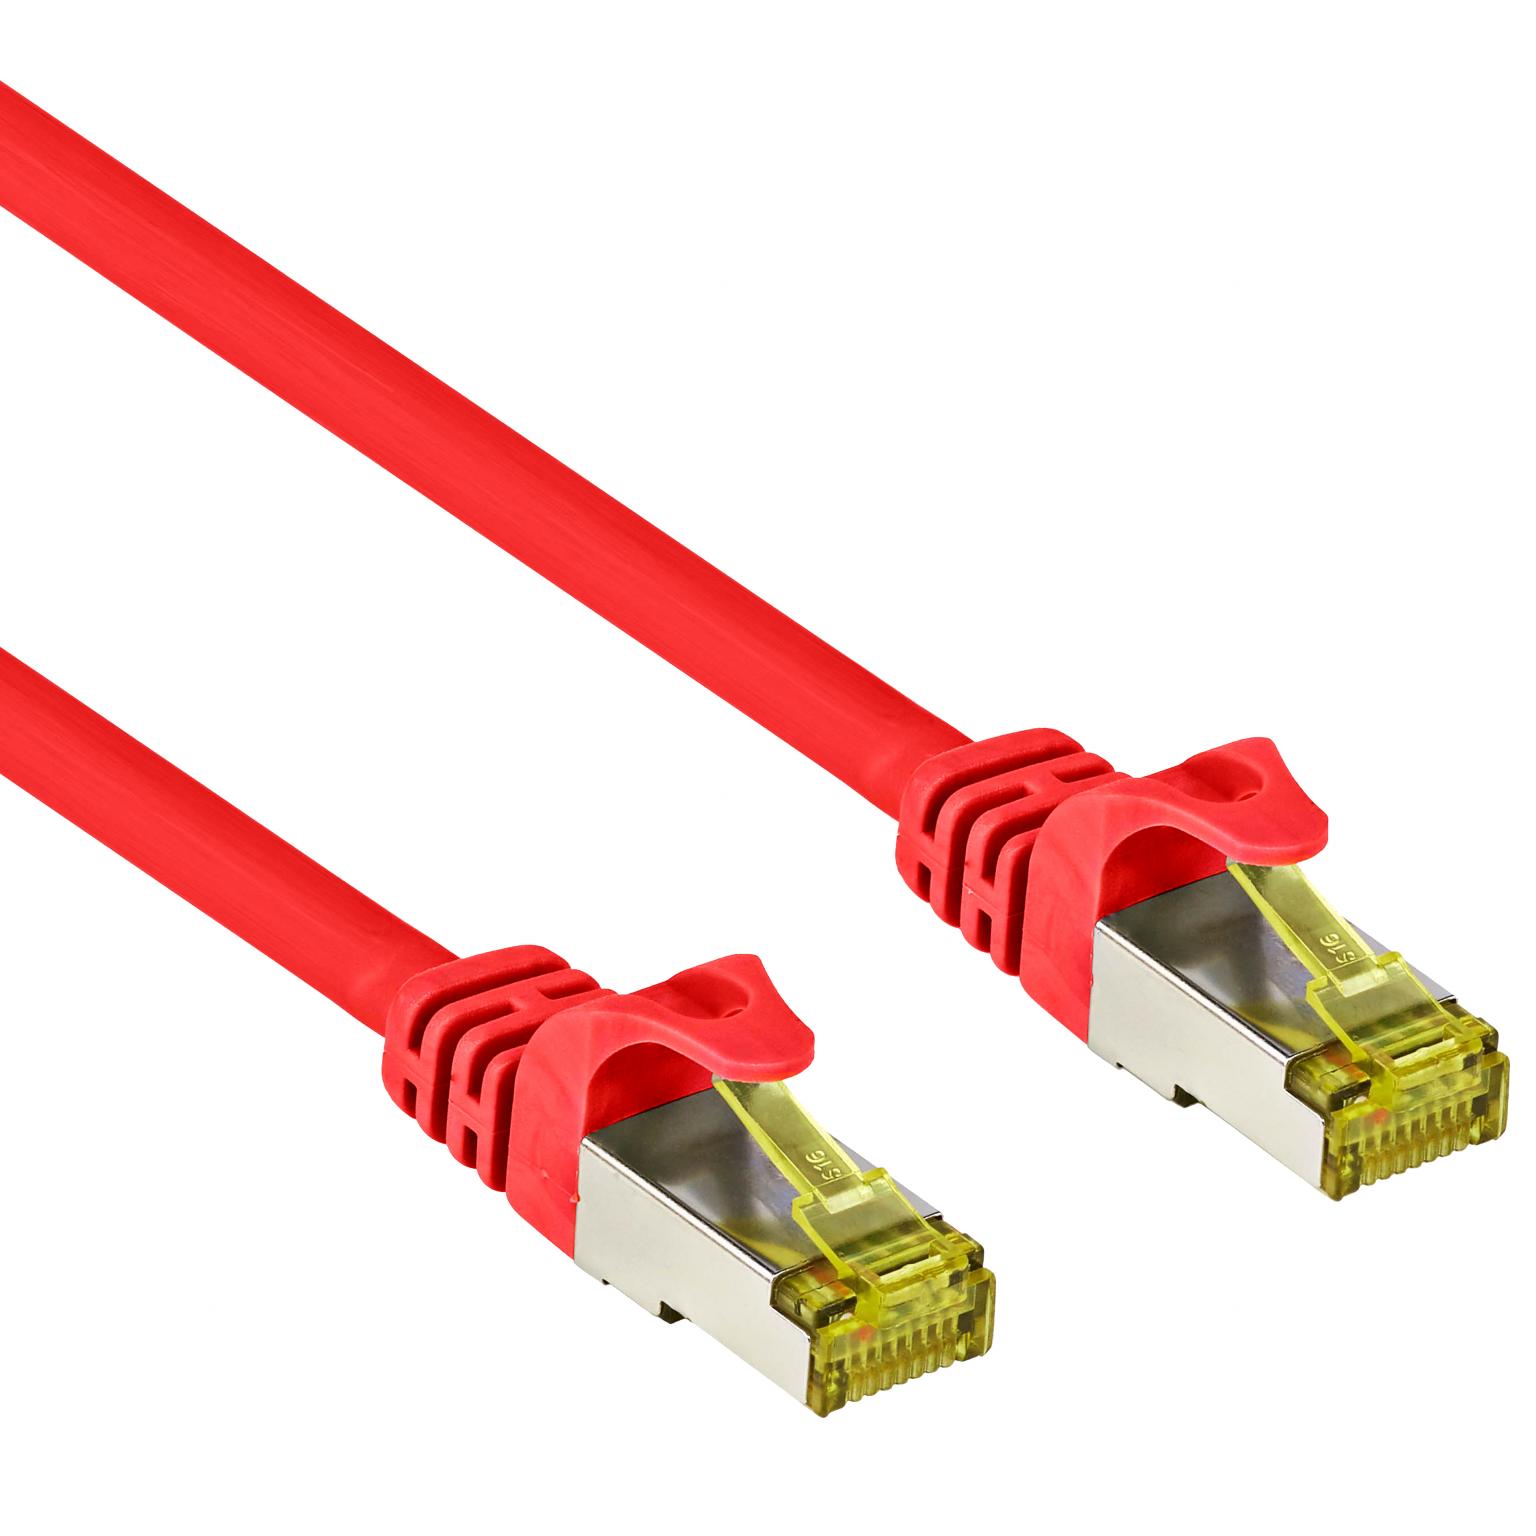 Image of S-FTP Kabel - 30 meter - Rood - Quality4All